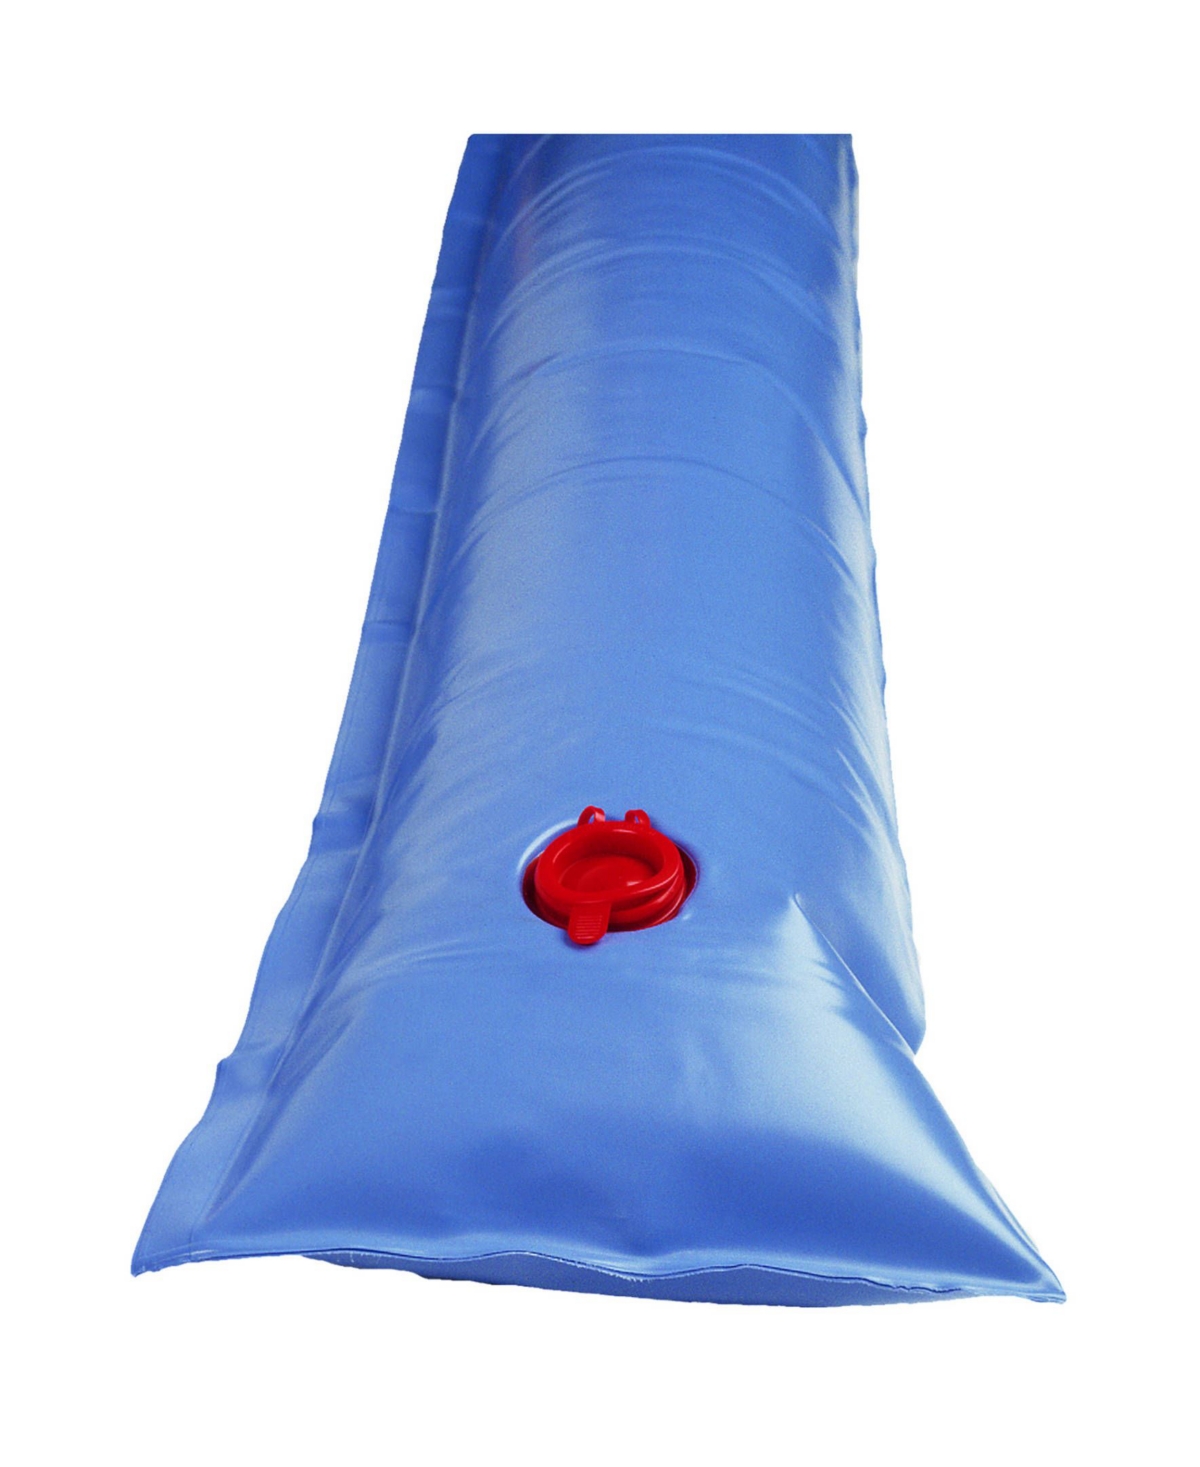 Sports 10' Single Water Tube for Winter Pool Cover - 5 Pack - Blue